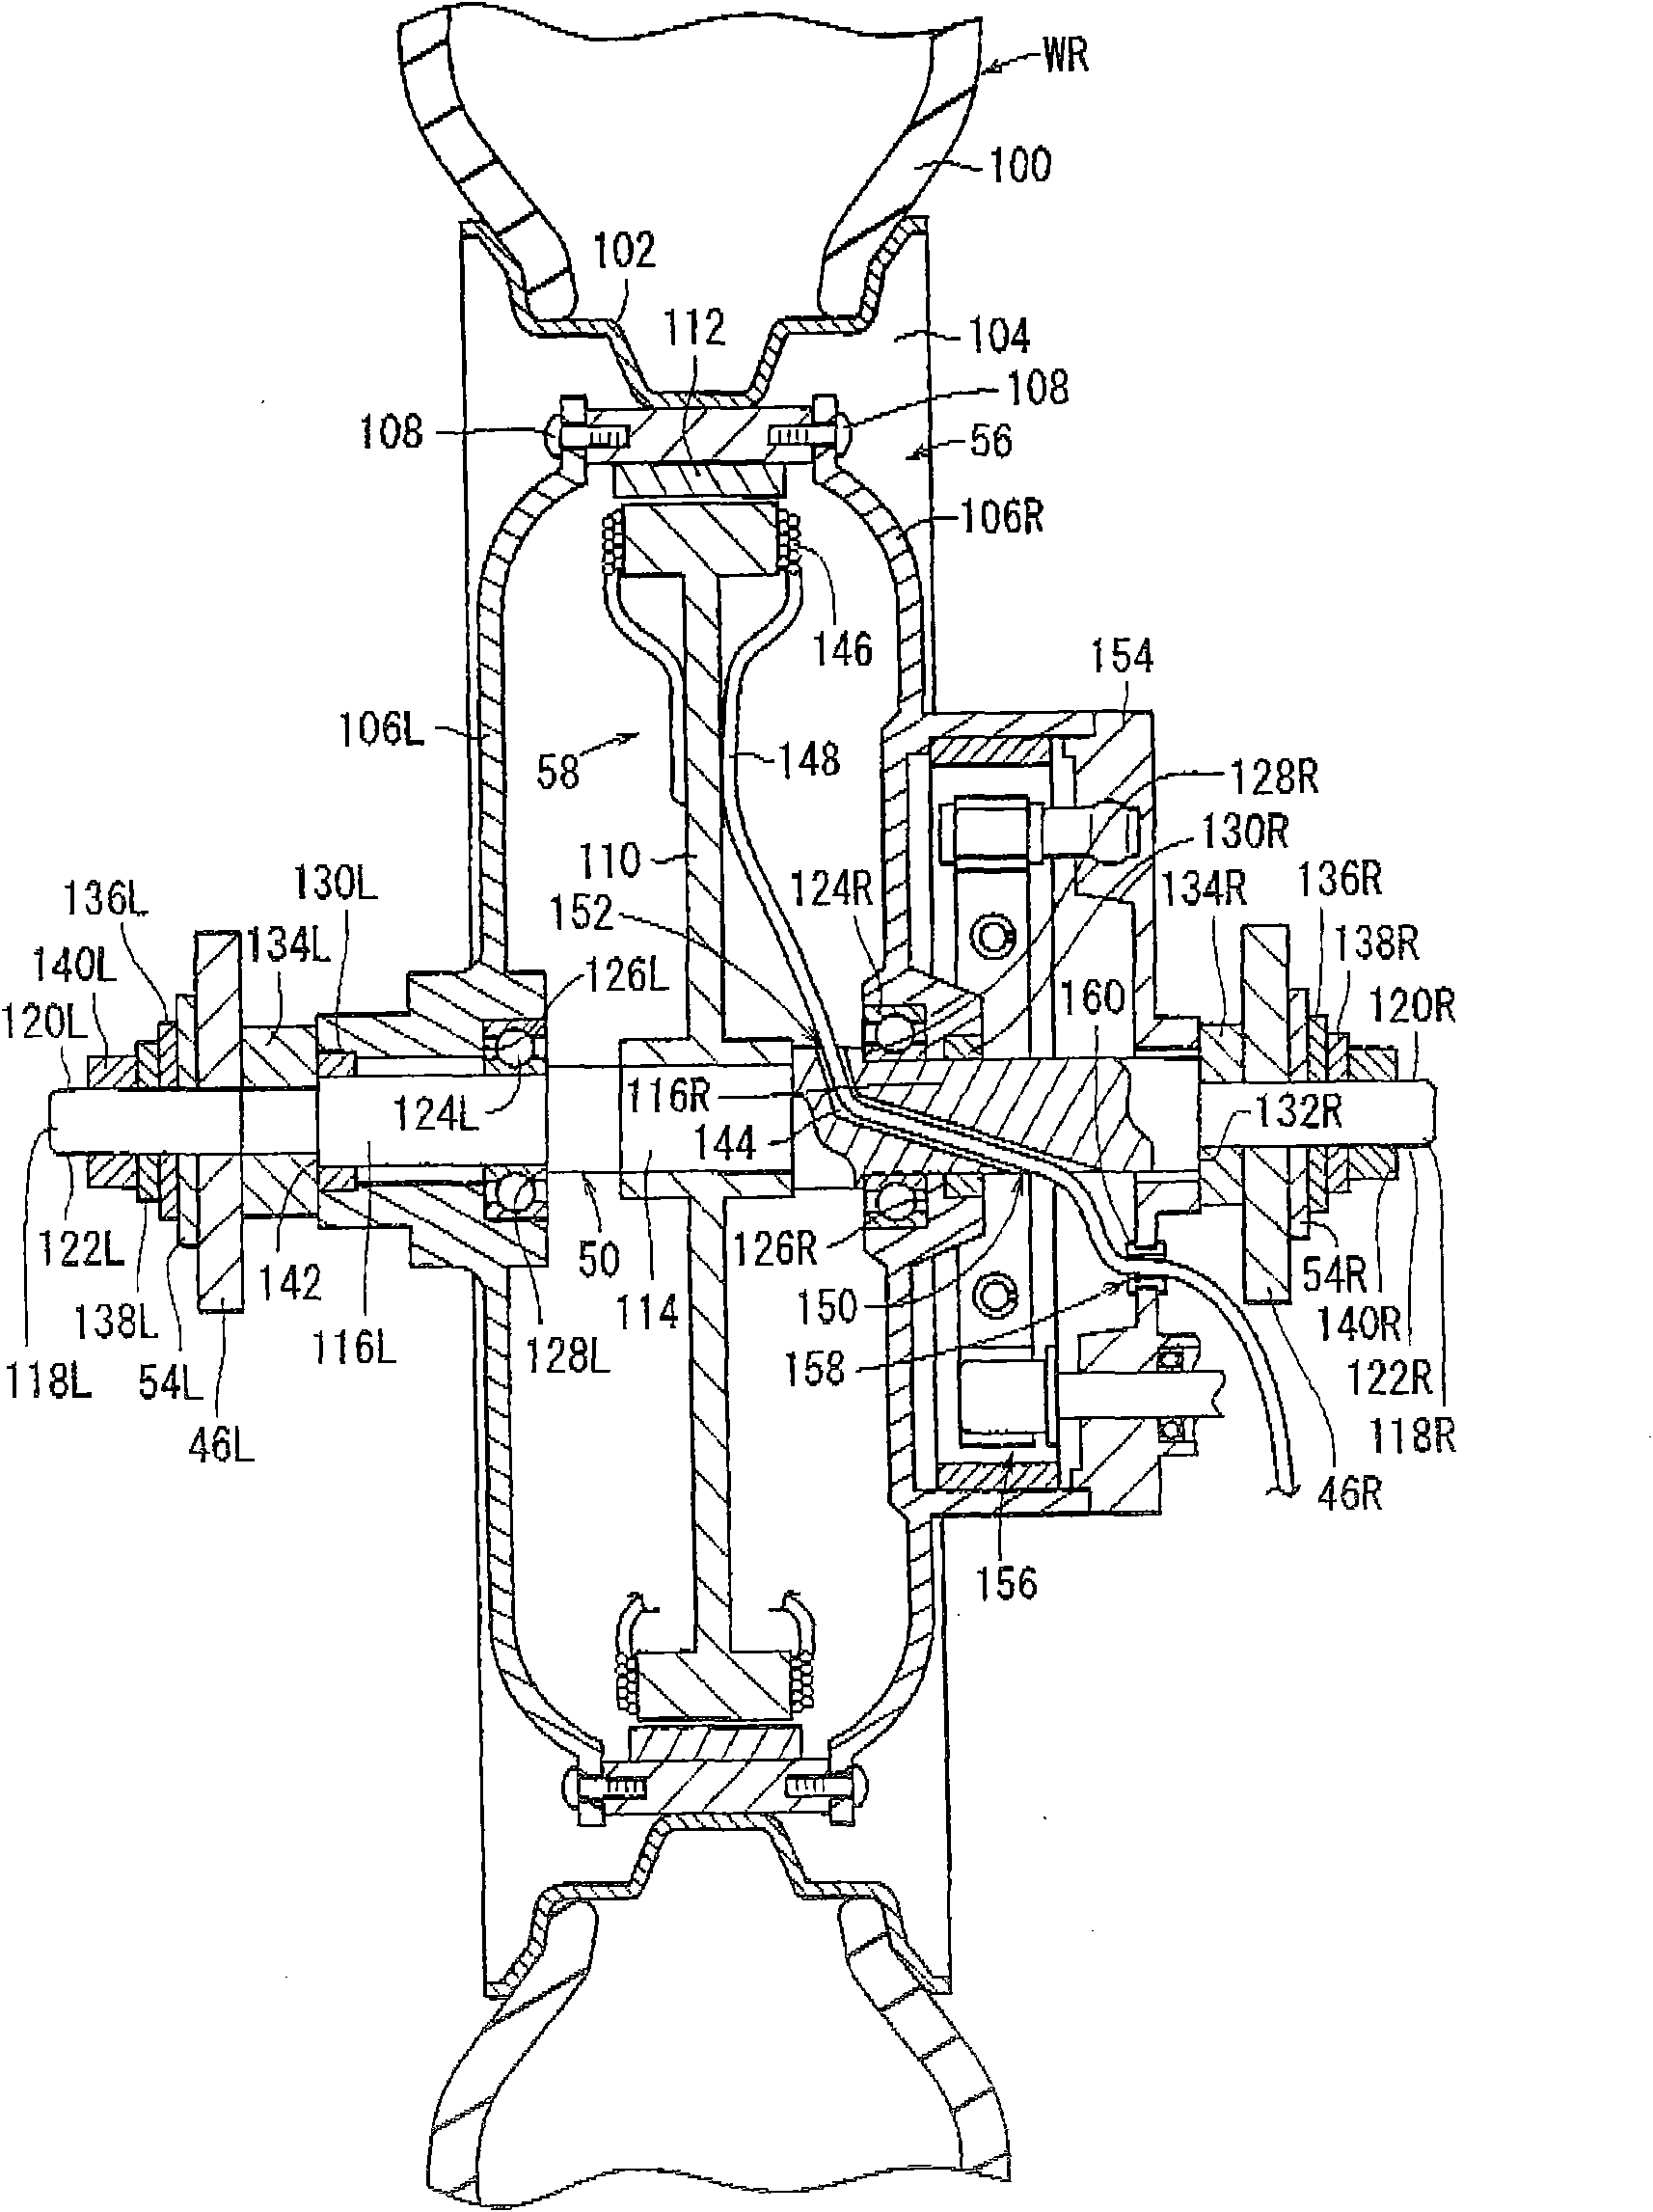 Fixing structure of motor shaft for electric vehicle